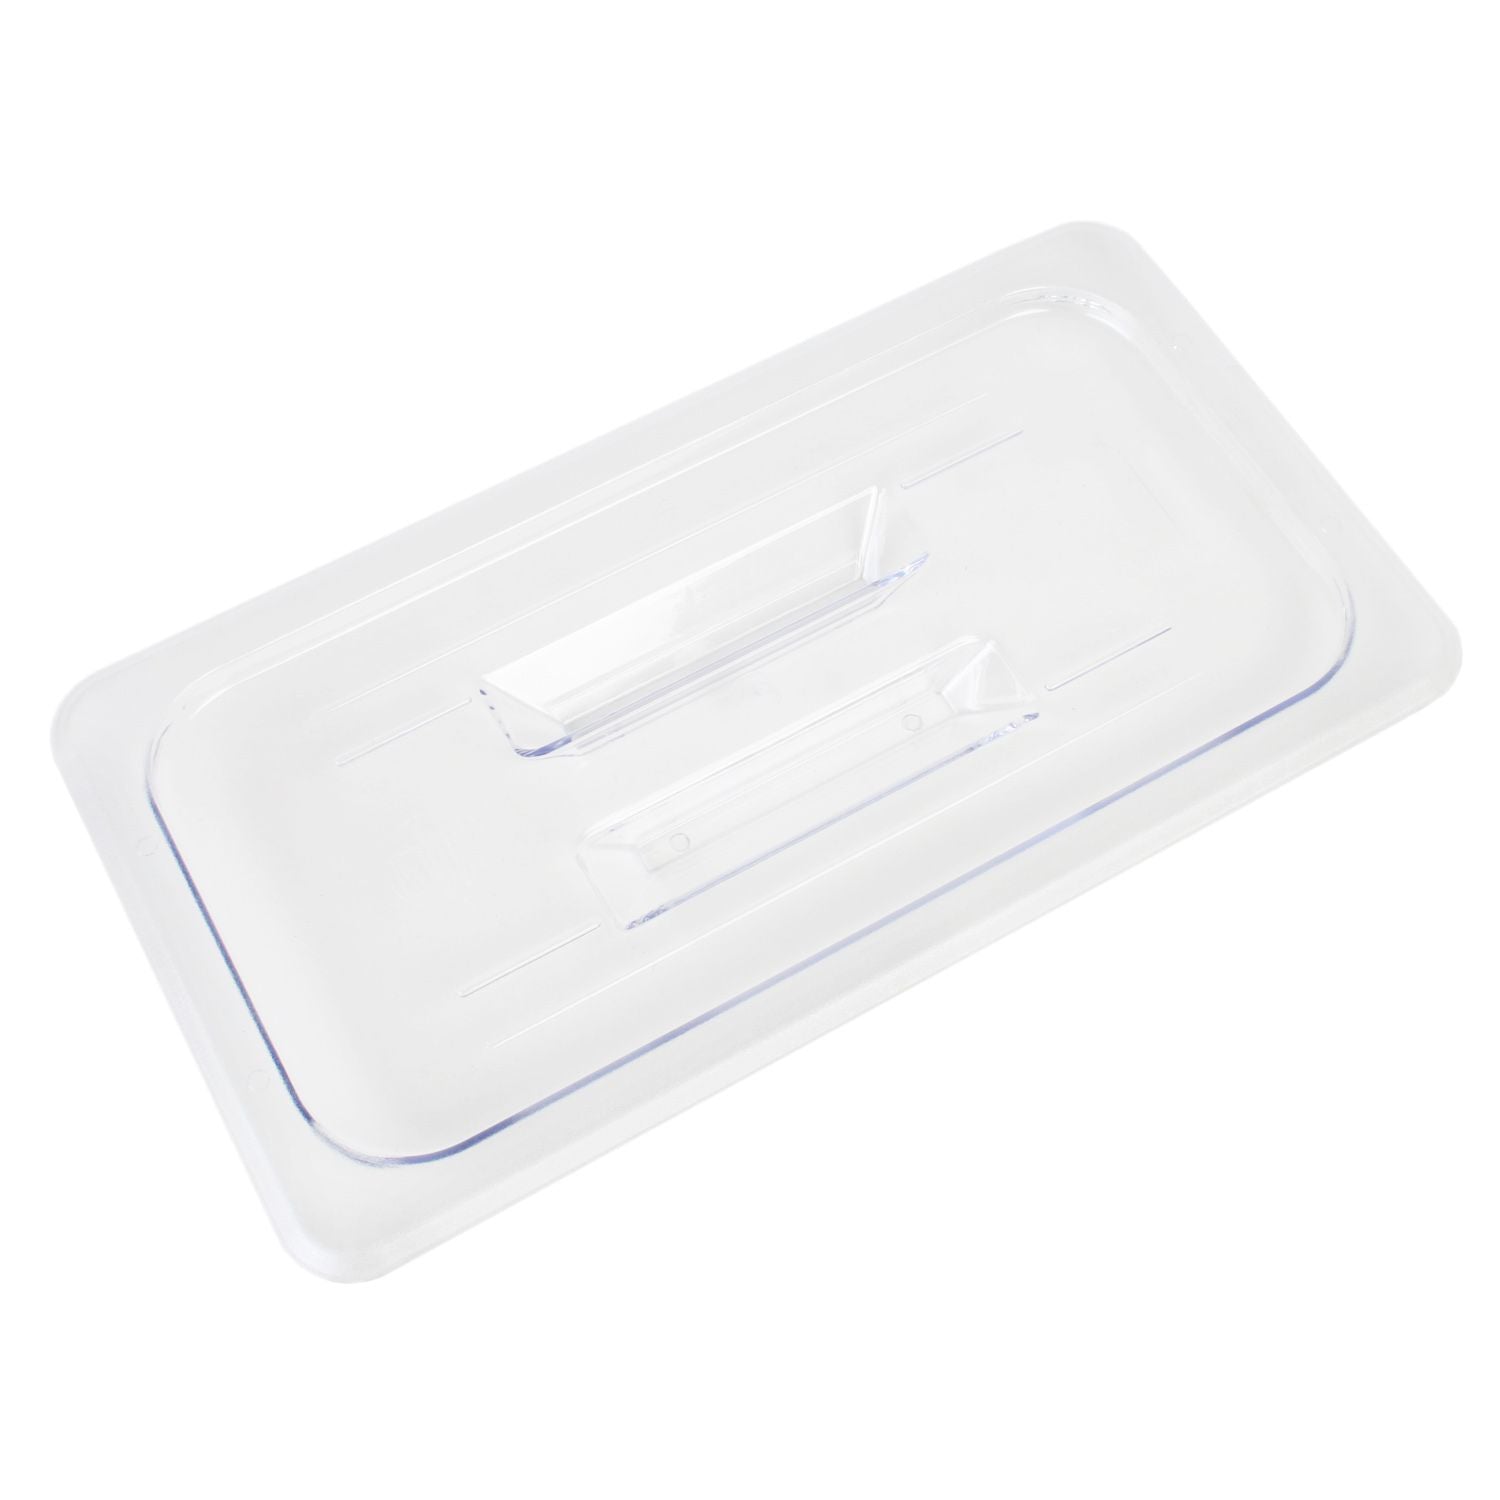 Thunder Group Polycarbonate Solid Cover For Third Size Food Pan